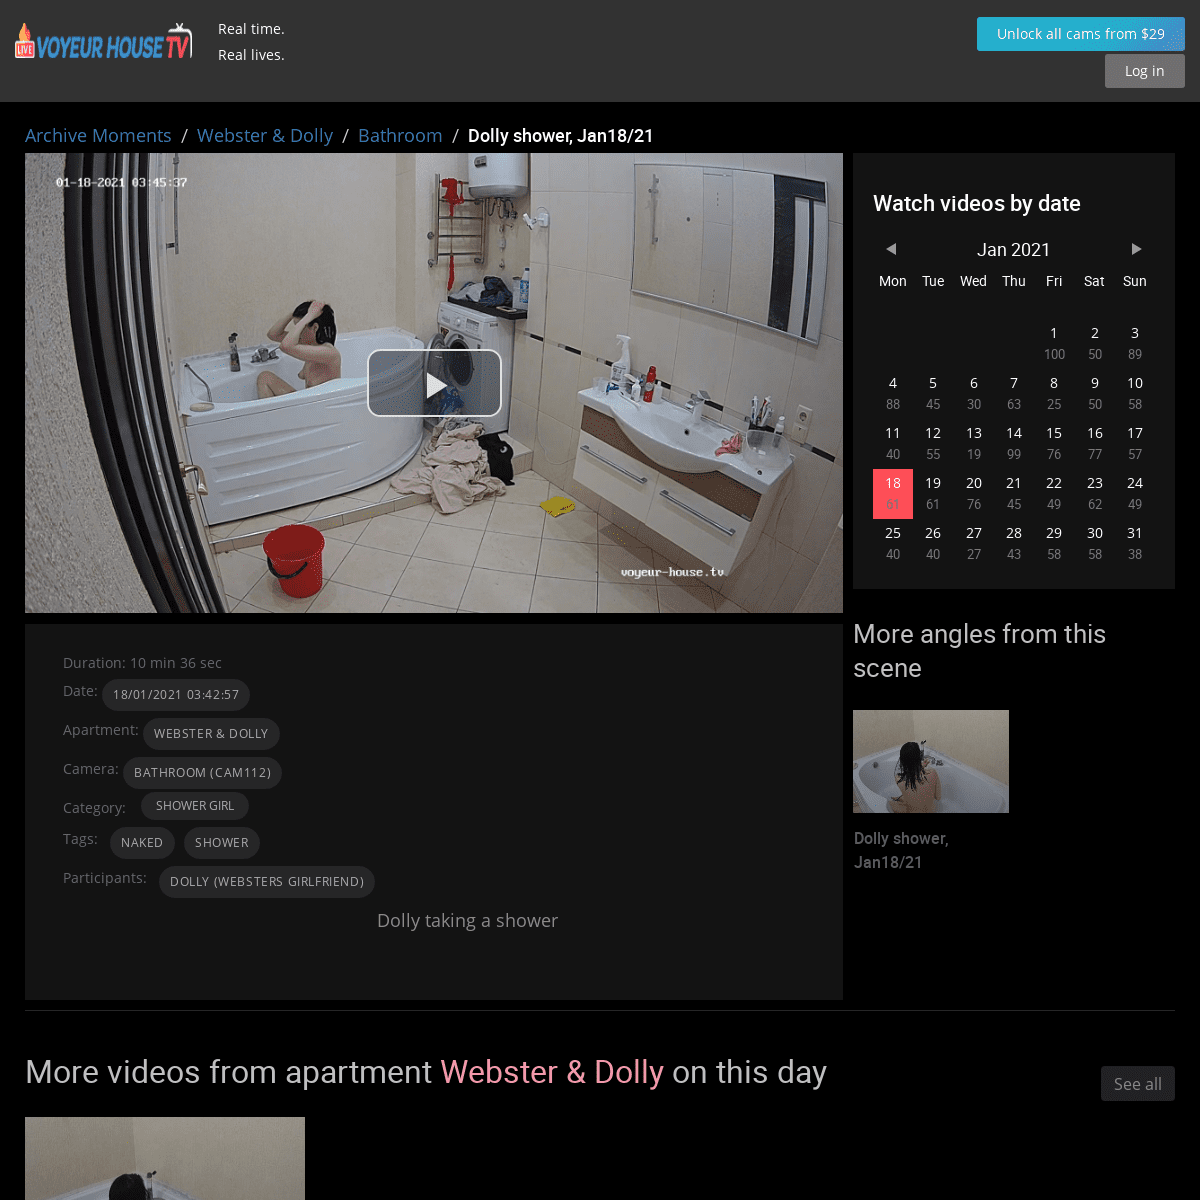 A complete backup of https://voyeur-house.tv/moments/realm48/cam112/dolly-shower-jan1821